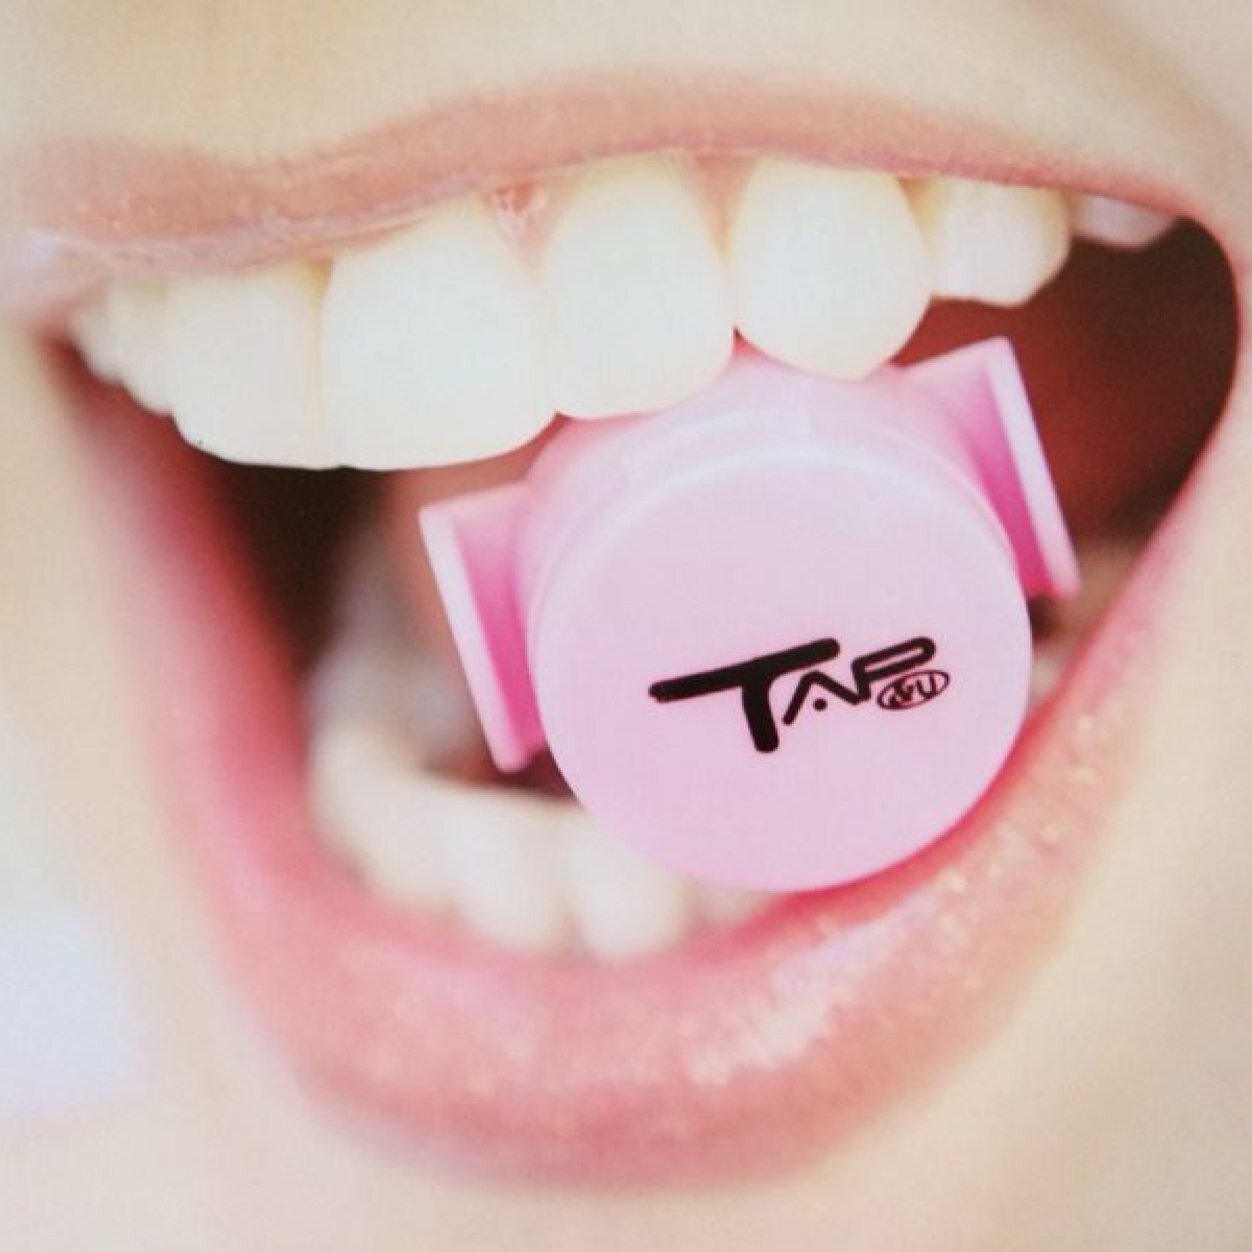 The new fashion accessory that everybody wants to have. #TAPYOURLIPS http://t.co/zvv4TRdAm0